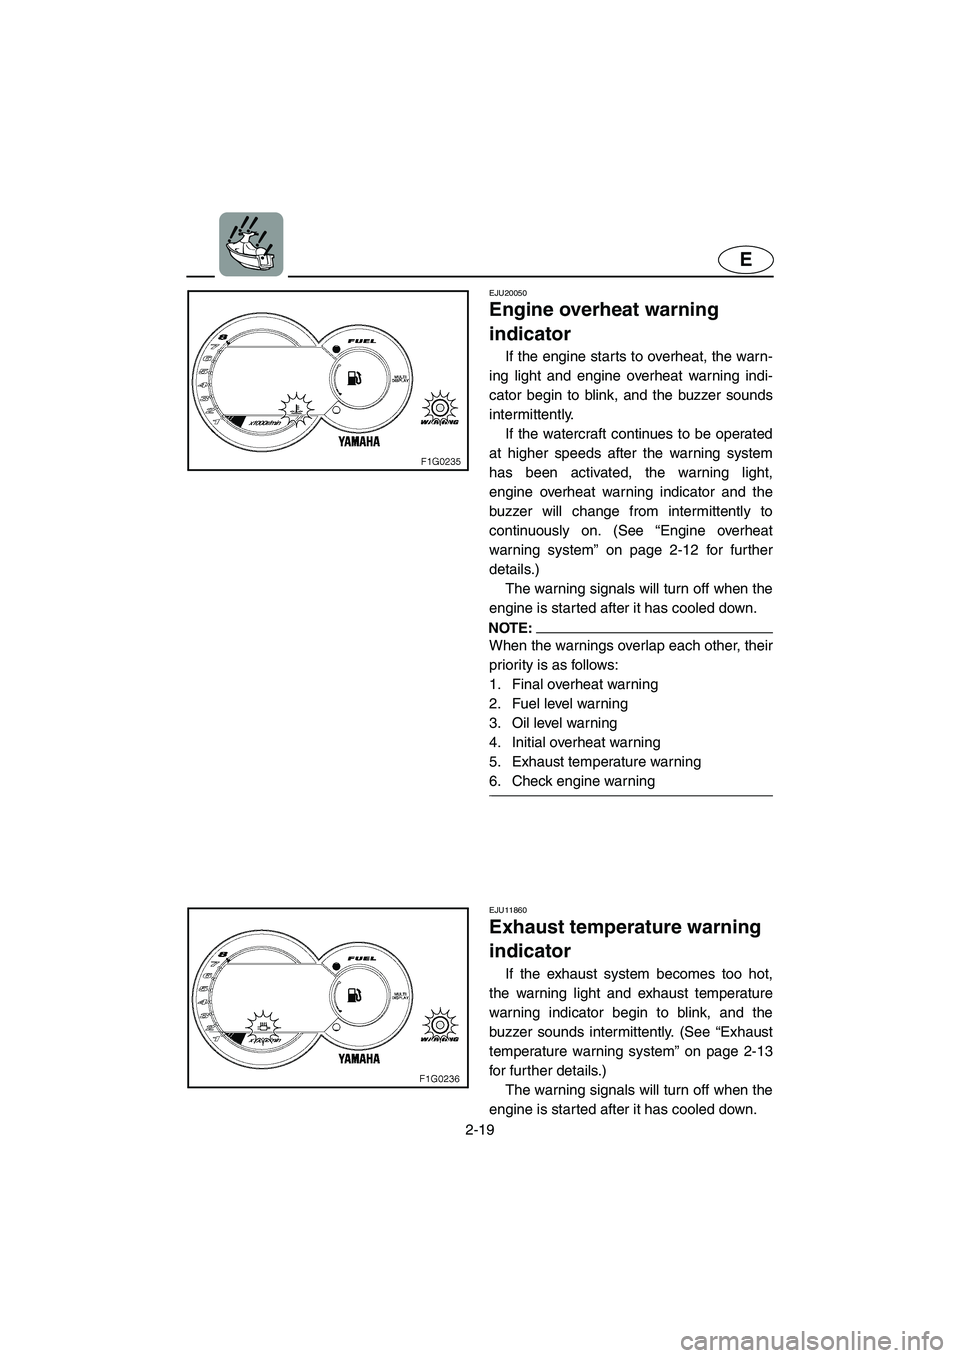 YAMAHA GP1300R 2003 Service Manual 2-19
E
EJU20050
Engine overheat warning 
indicator 
If the engine starts to overheat, the warn-
ing light and engine overheat warning indi-
cator begin to blink, and the buzzer sounds
intermittently. 